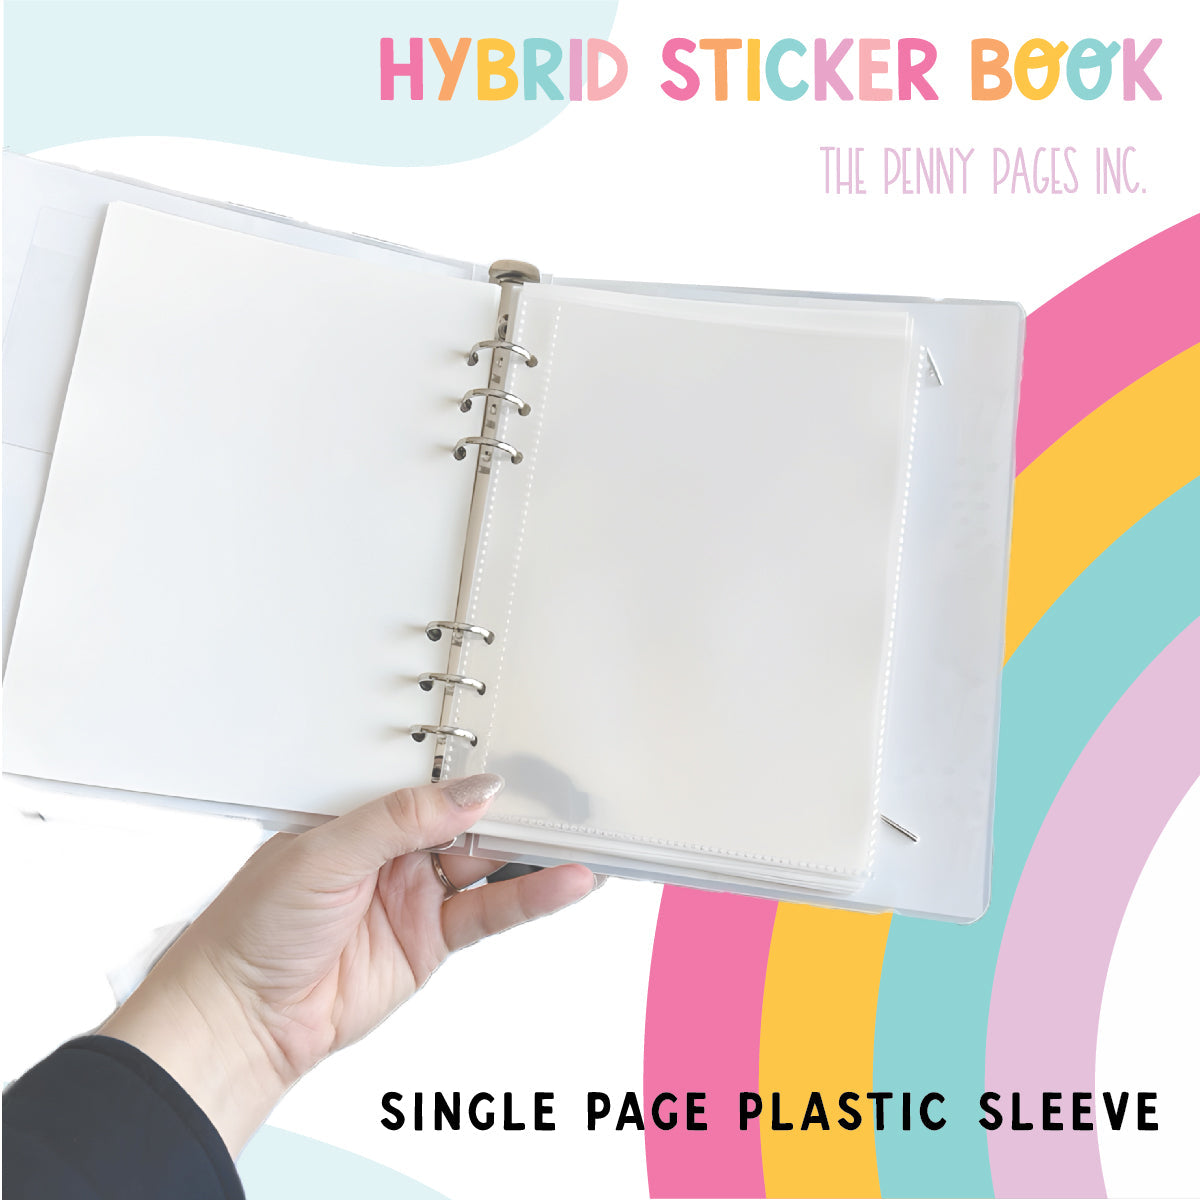 Blue and Purple Feathers - Hybrid Sticker Book